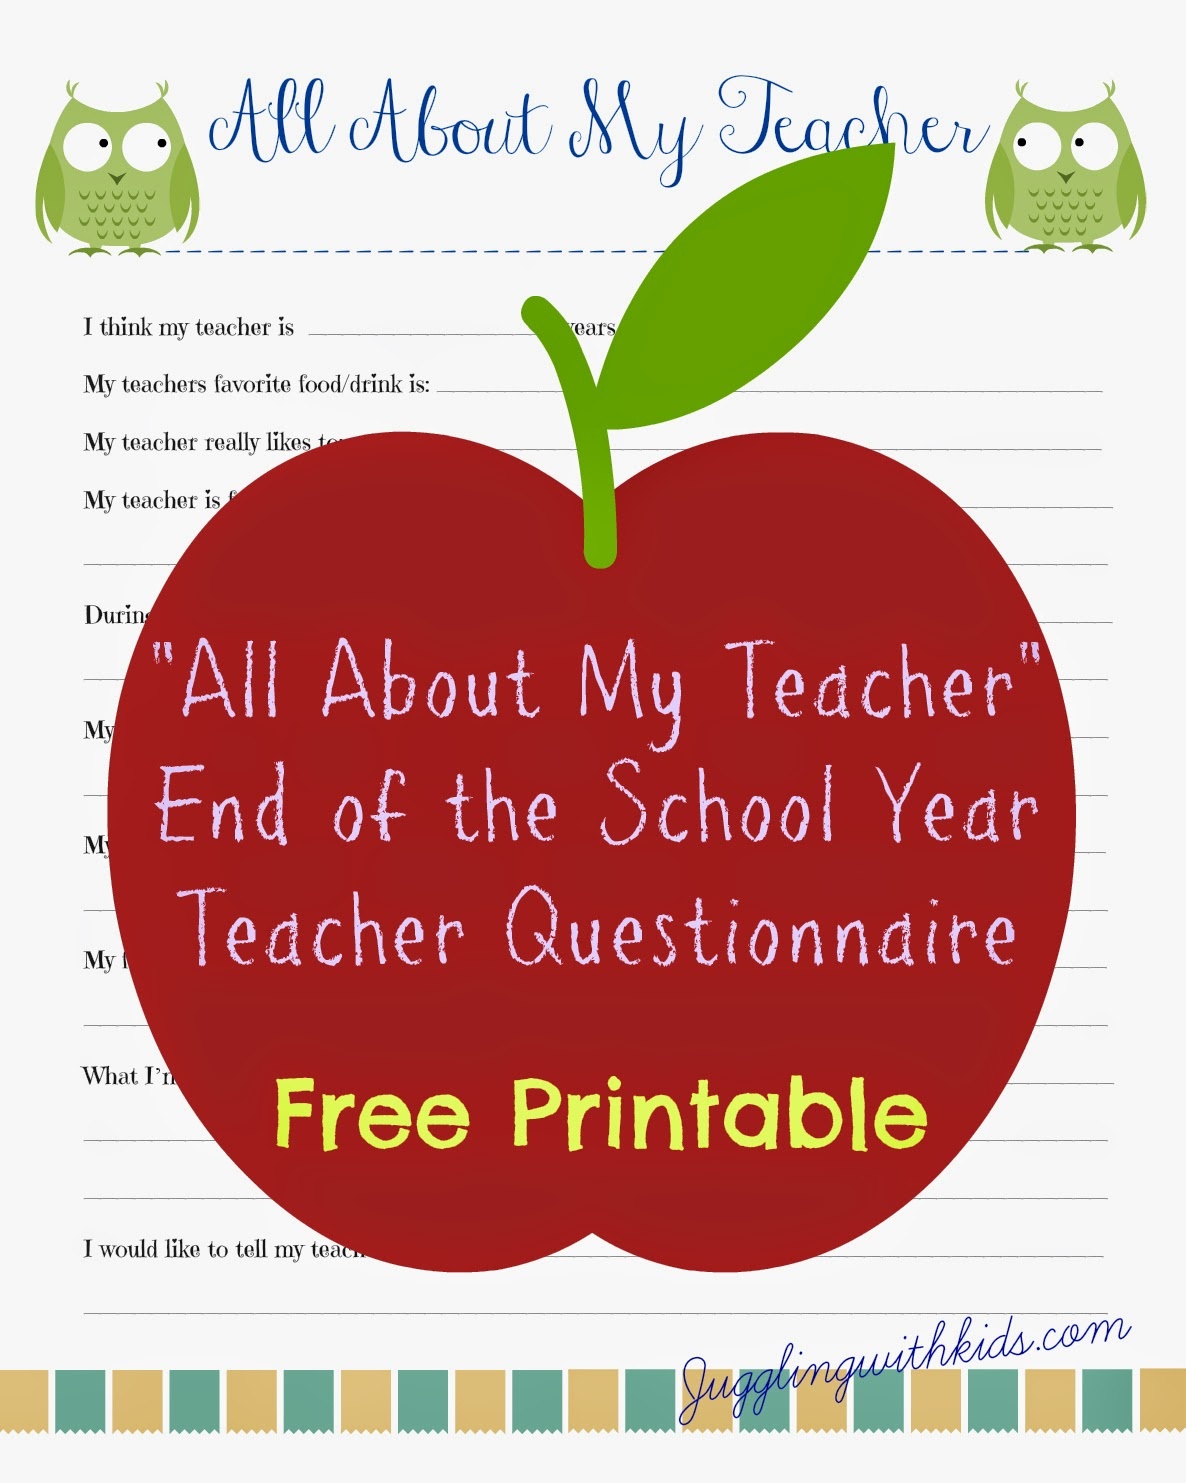 Free Teacher Printable Questionnaire For End Of School Year - All About My Teacher Free Printable